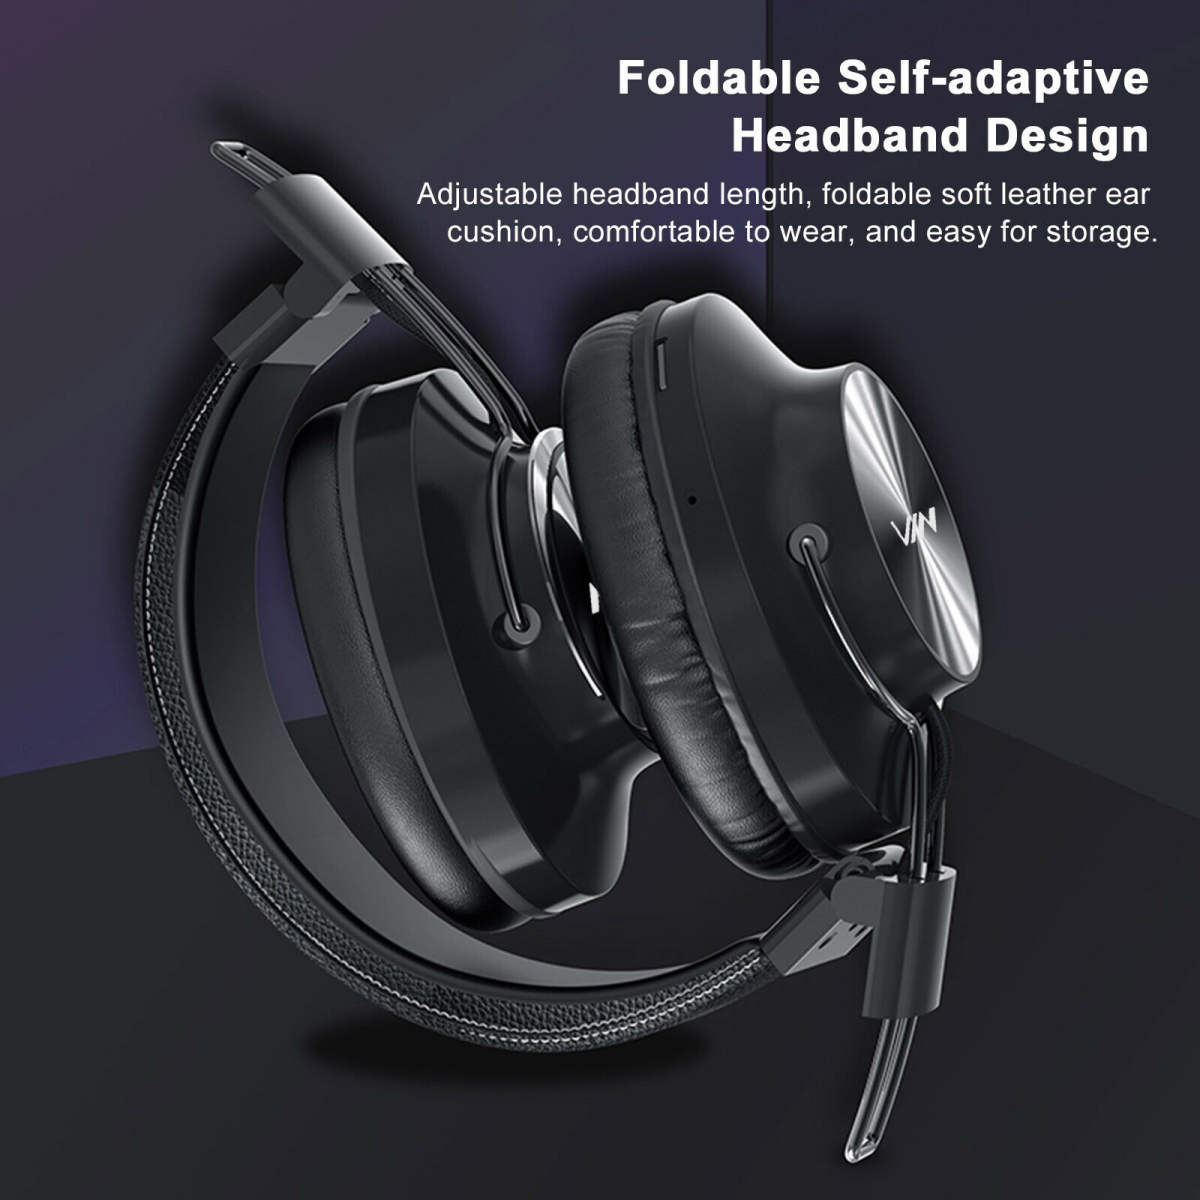 NIA S4000 BLUETOOTH HEADSET - Ear Wireless Headphones, FM Radio, MP3 Player and Micro SD/TF with 40mm Deep Bass Drivers, Premium Wireless Microphone Built-in Headset, Foldable, Comfortable Office Travel